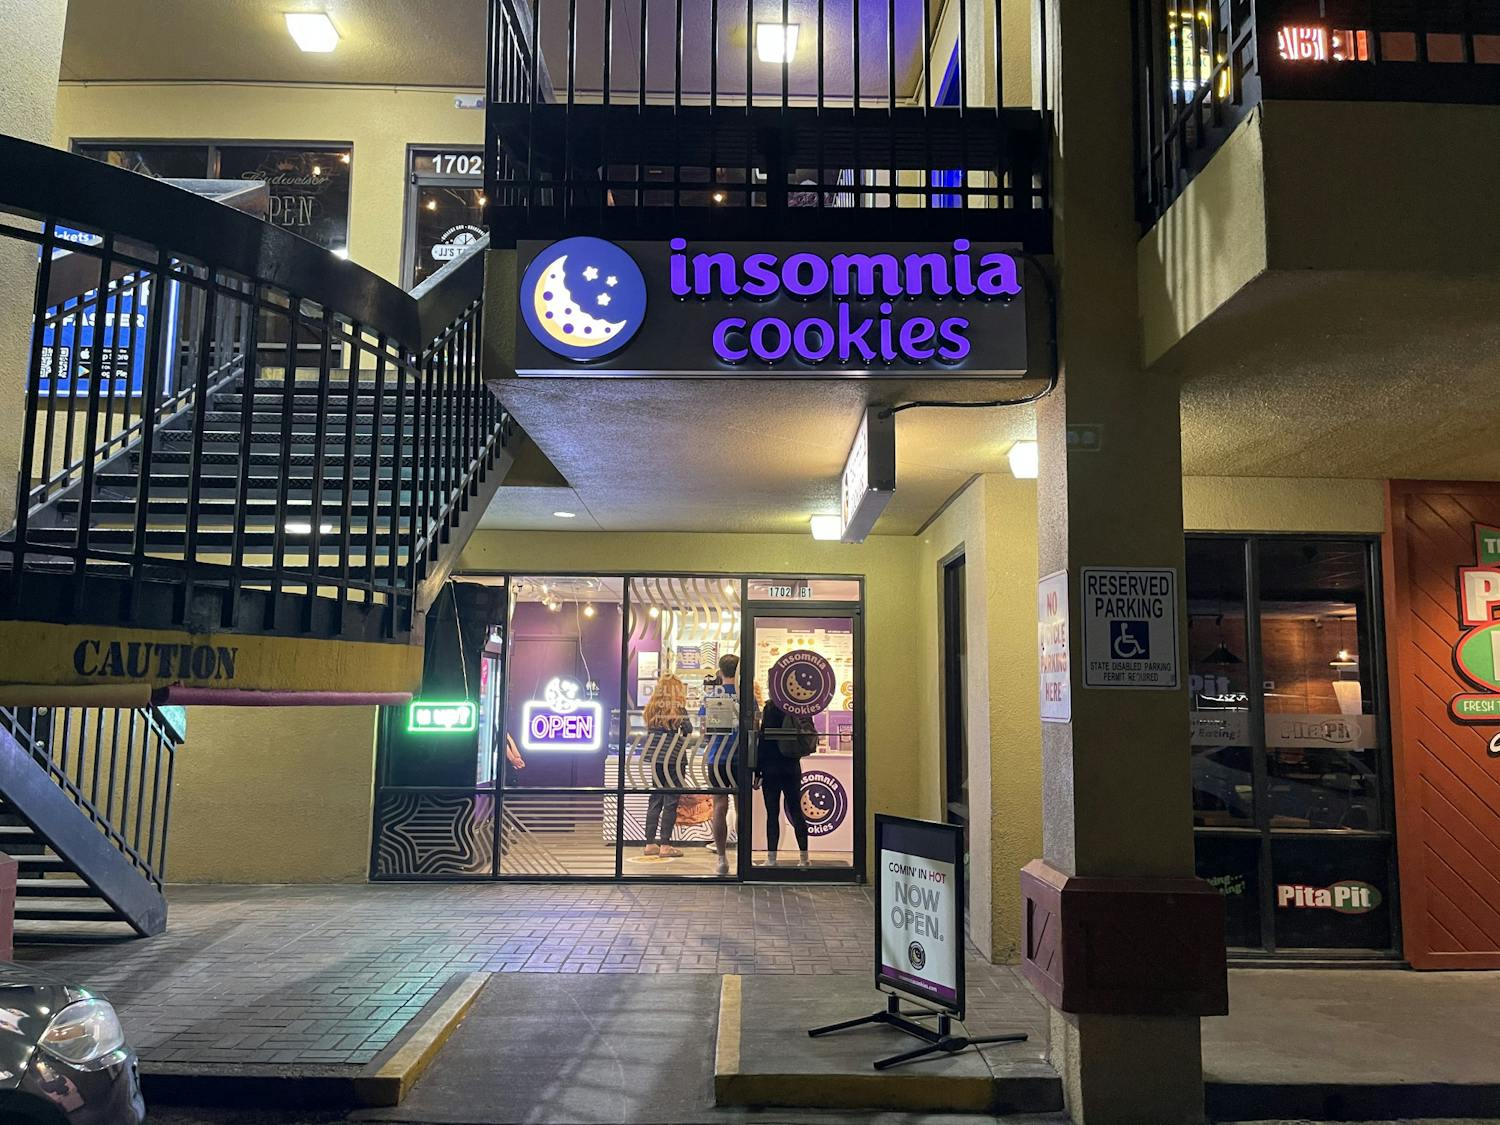 The late-night cookie store, which held its grand opening on March 13, is located directly across from UF campus at 1702 West University Avenue.